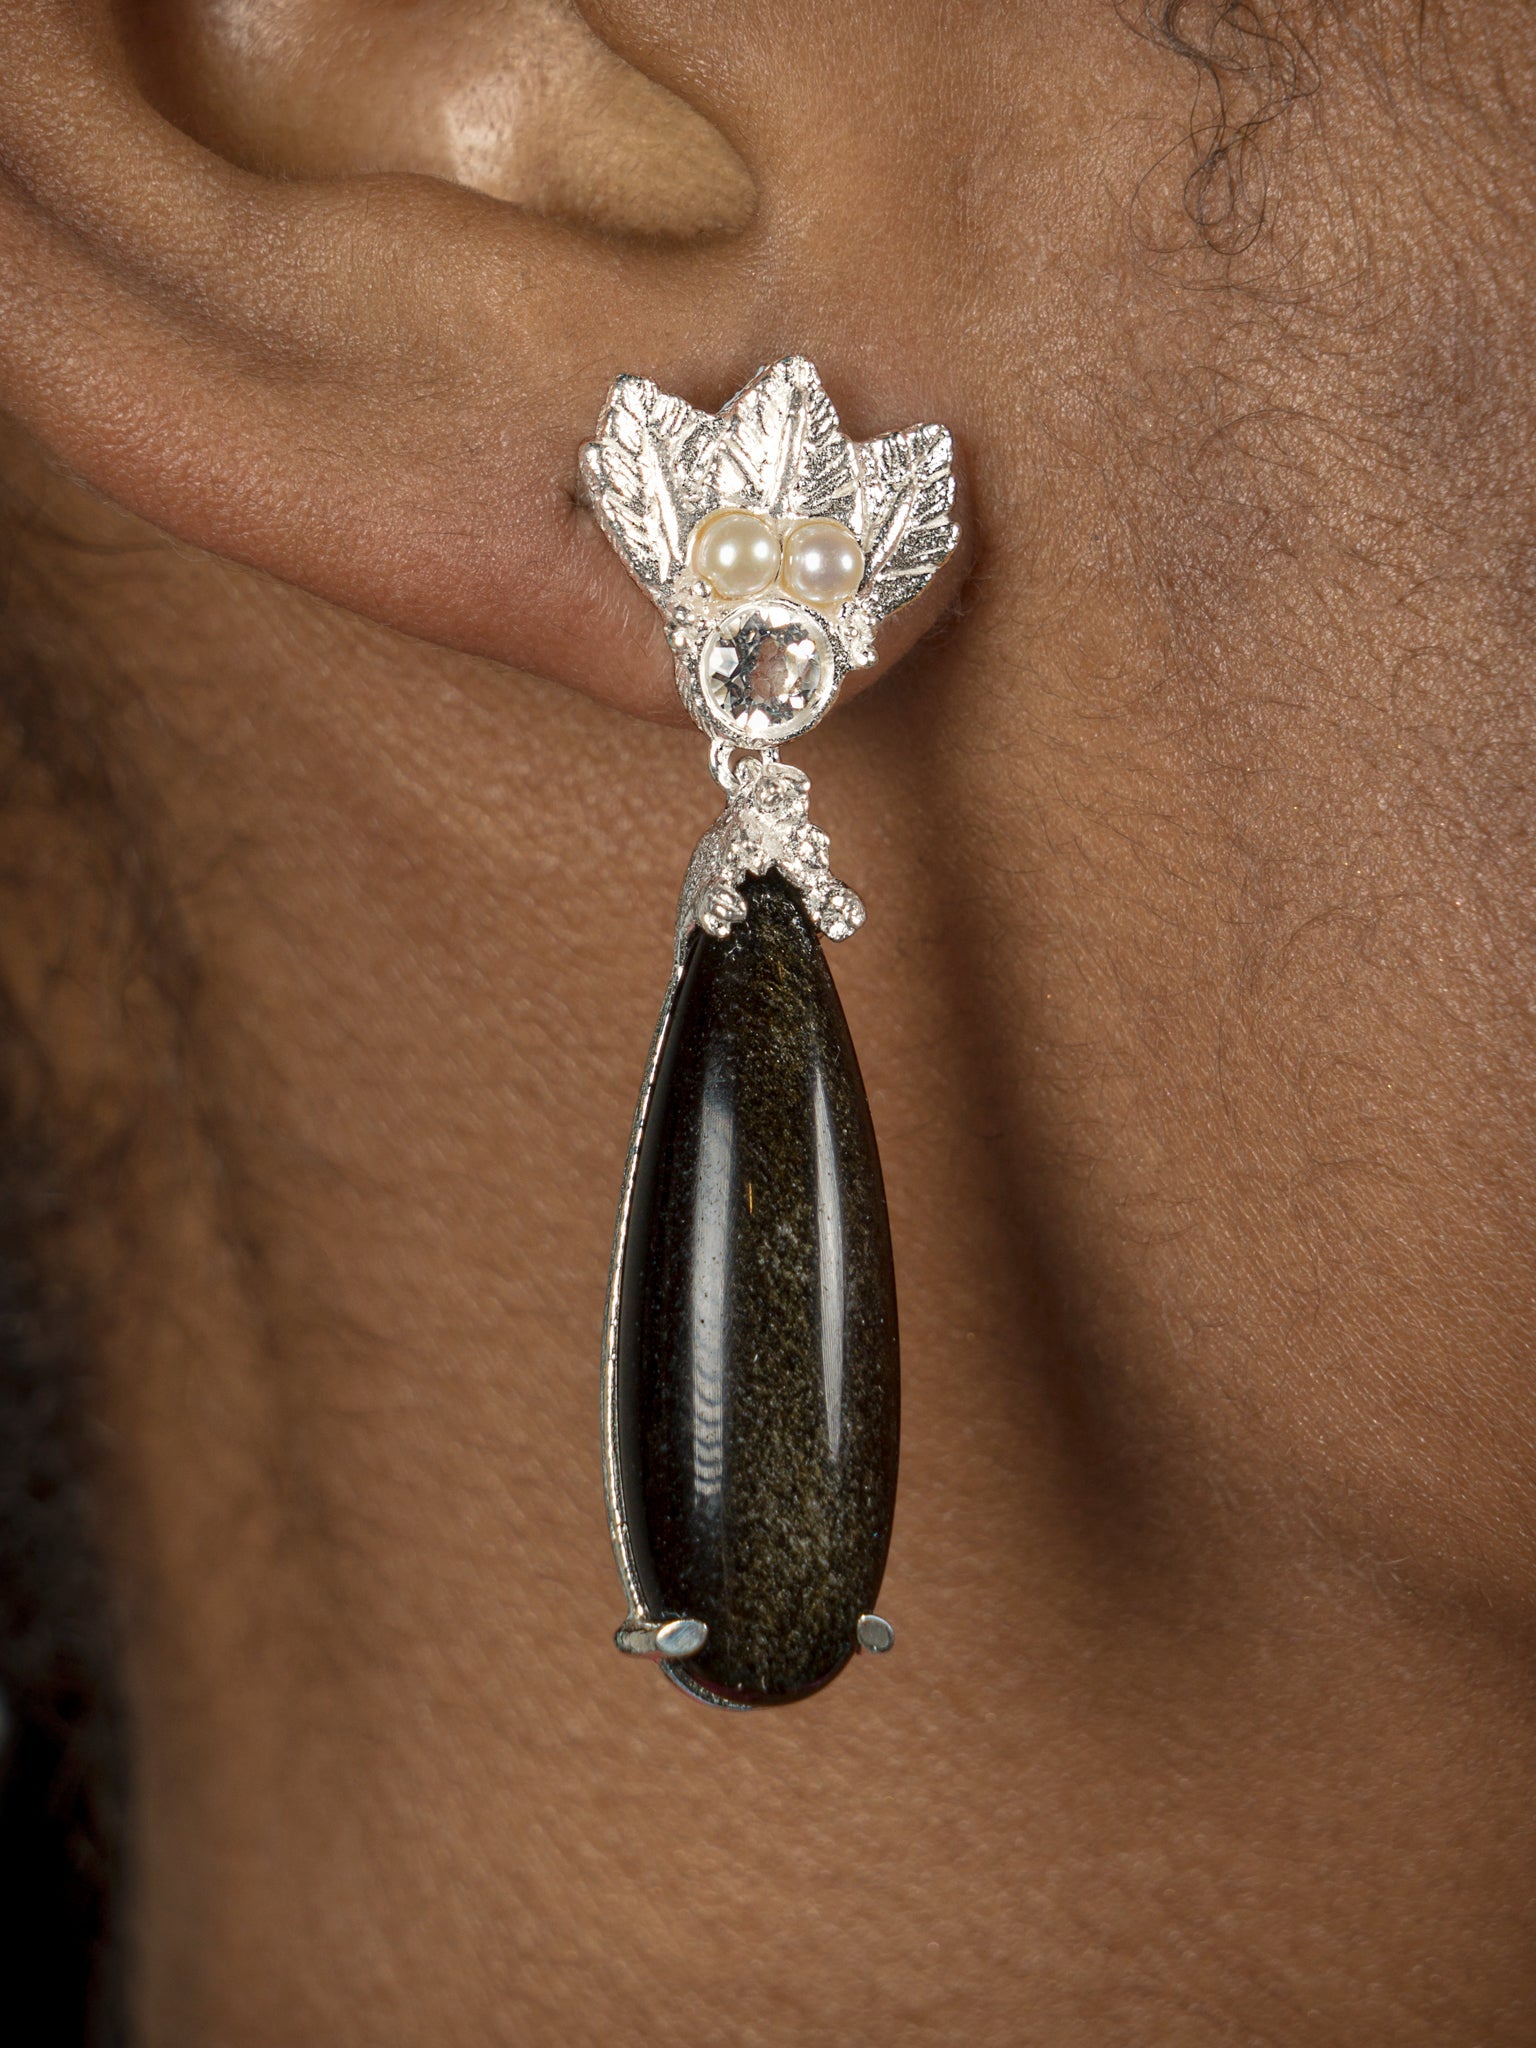 An elegant woman wearing a pair of The Muse III Obsidian earrings by Cremilde Bispo Jewellery, showcasing exquisite jewelry.